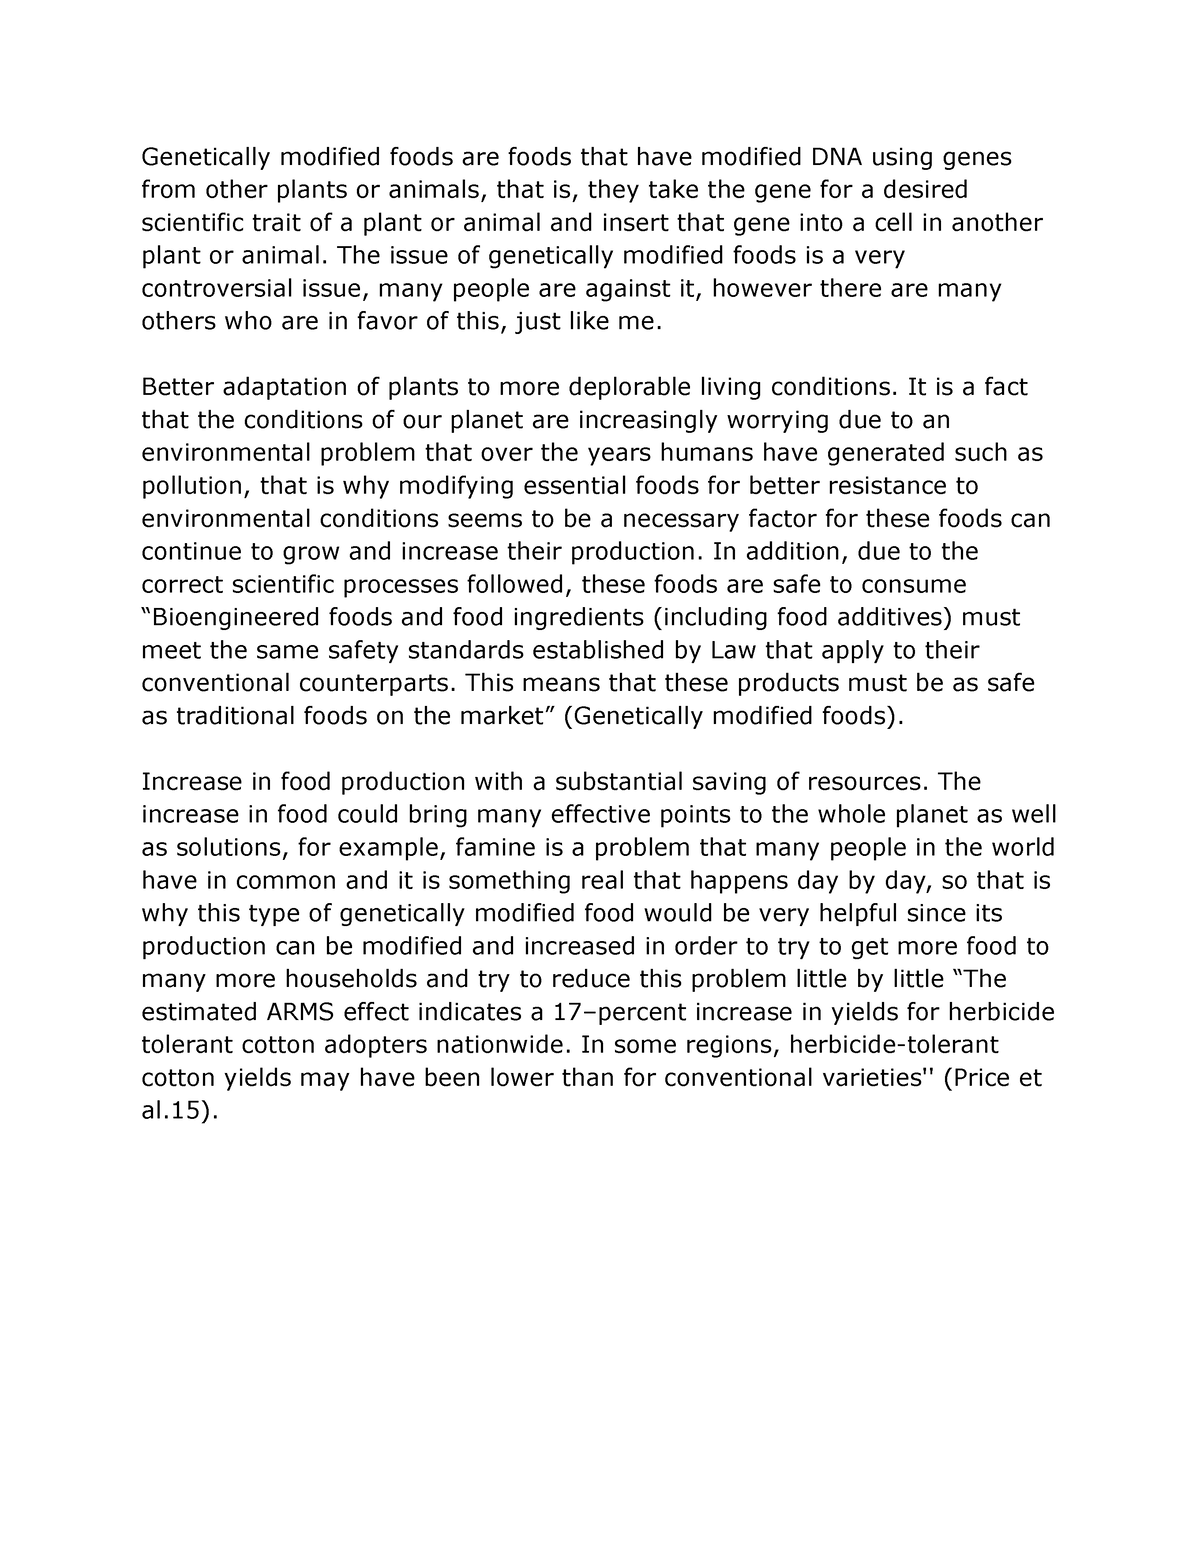 argumentative essay for genetically modified foods